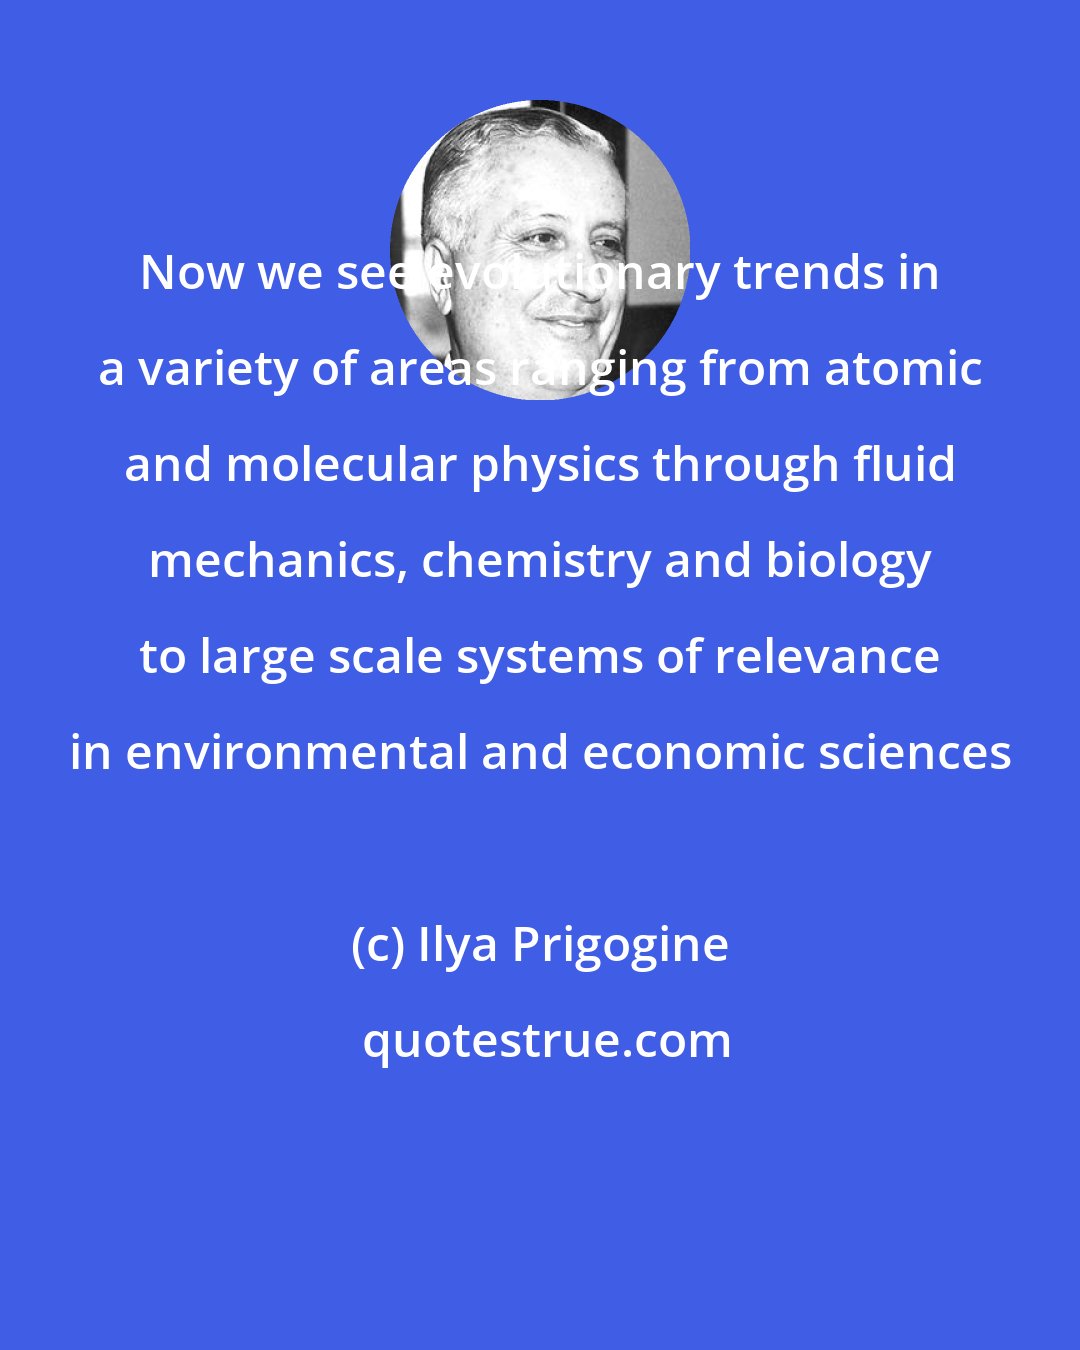 Ilya Prigogine: Now we see evolutionary trends in a variety of areas ranging from atomic and molecular physics through fluid mechanics, chemistry and biology to large scale systems of relevance in environmental and economic sciences